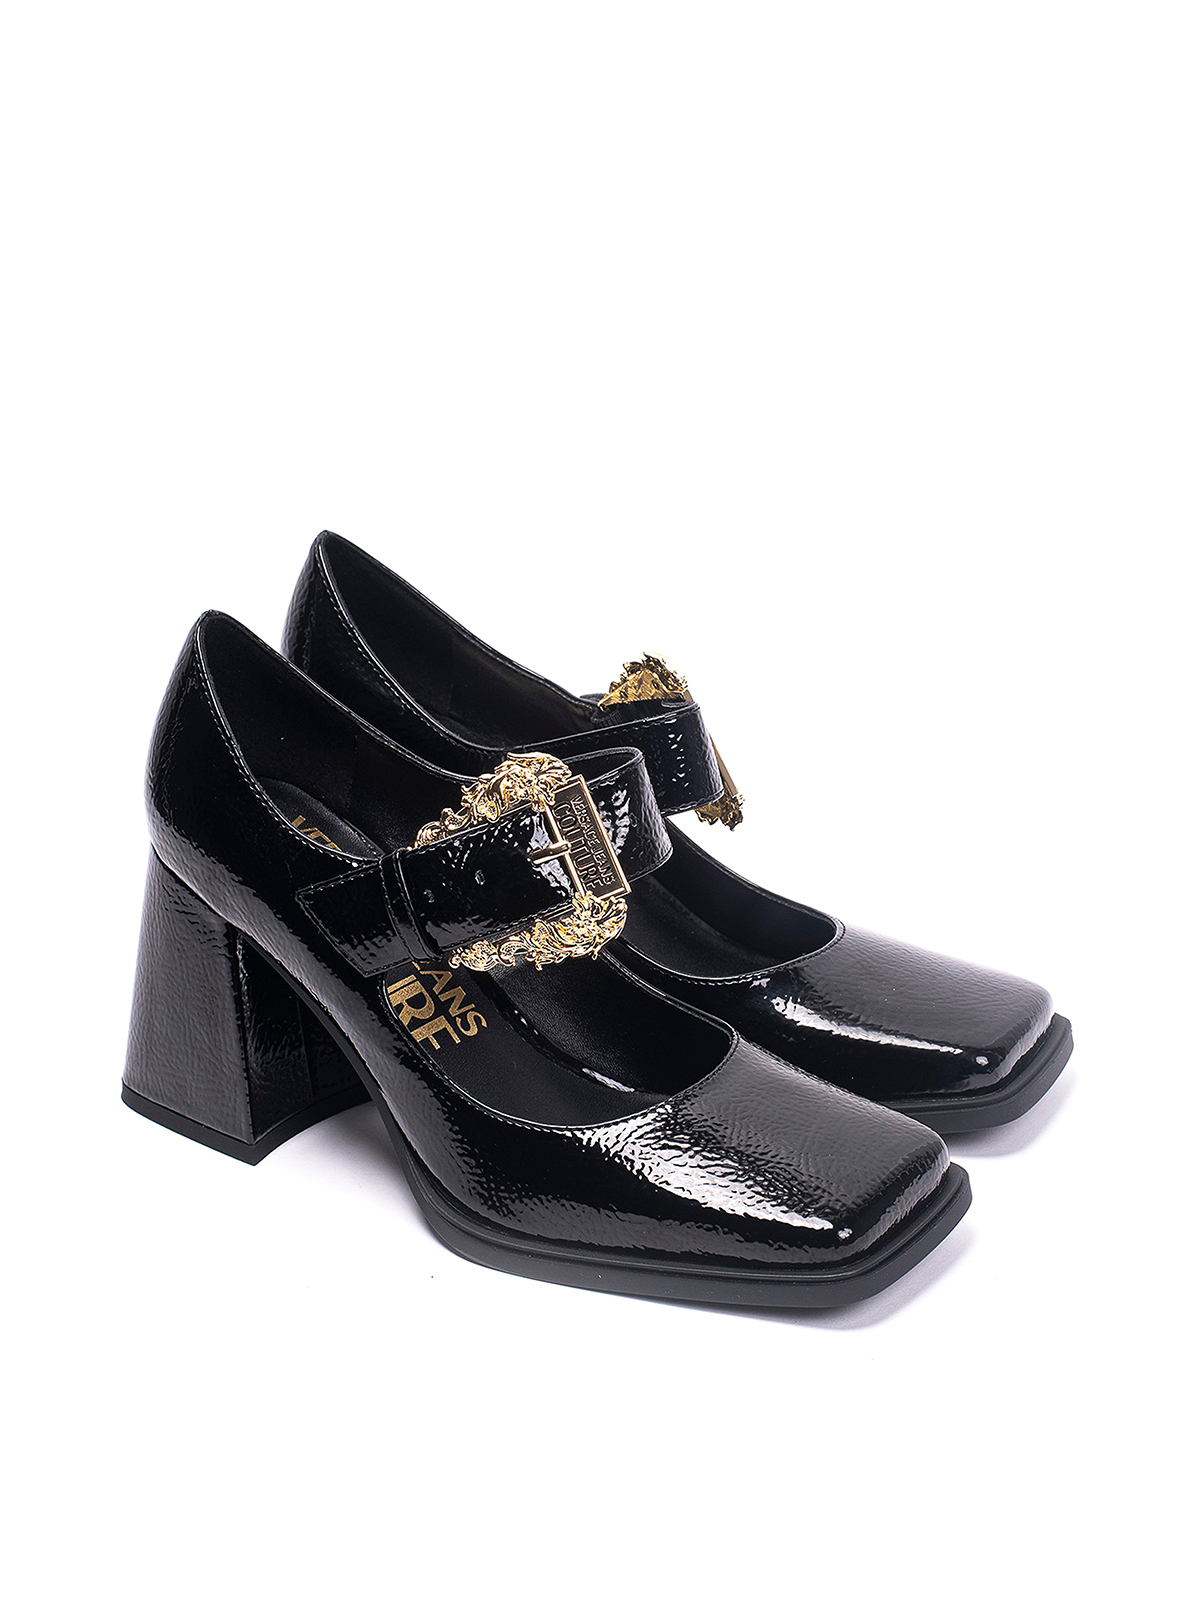 Buy Mary Janes Online  lazadasg